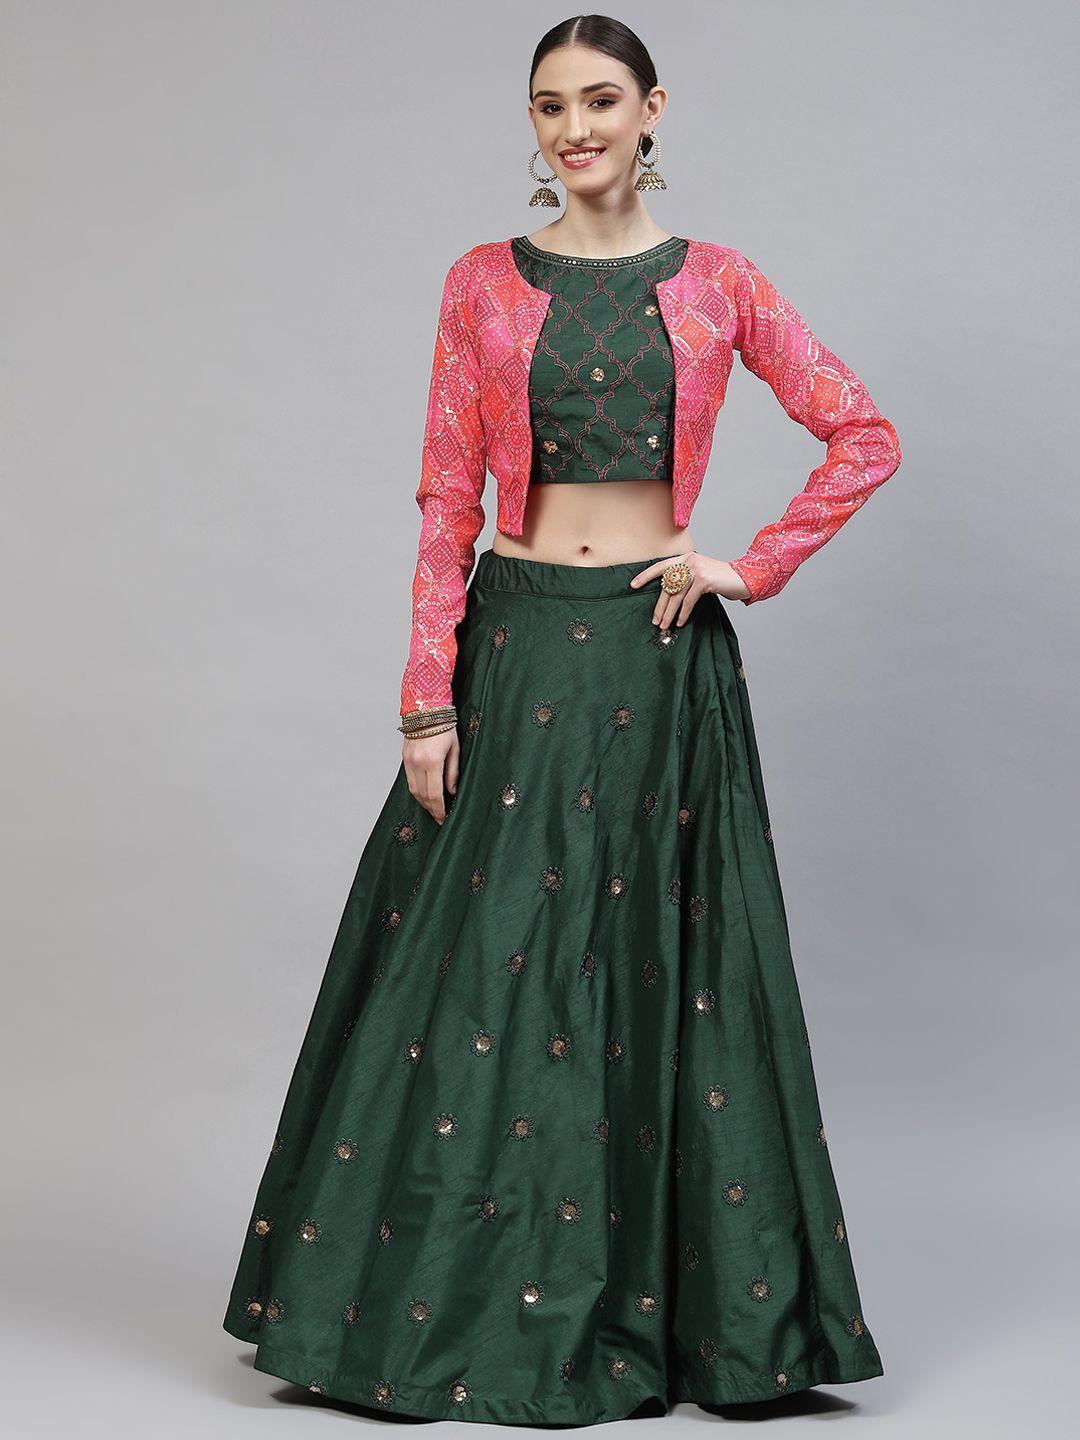 shubhkala-green-&-pink-embroidered-sequinned-semi-stitched-lehenga-&-blouse-with-jacket